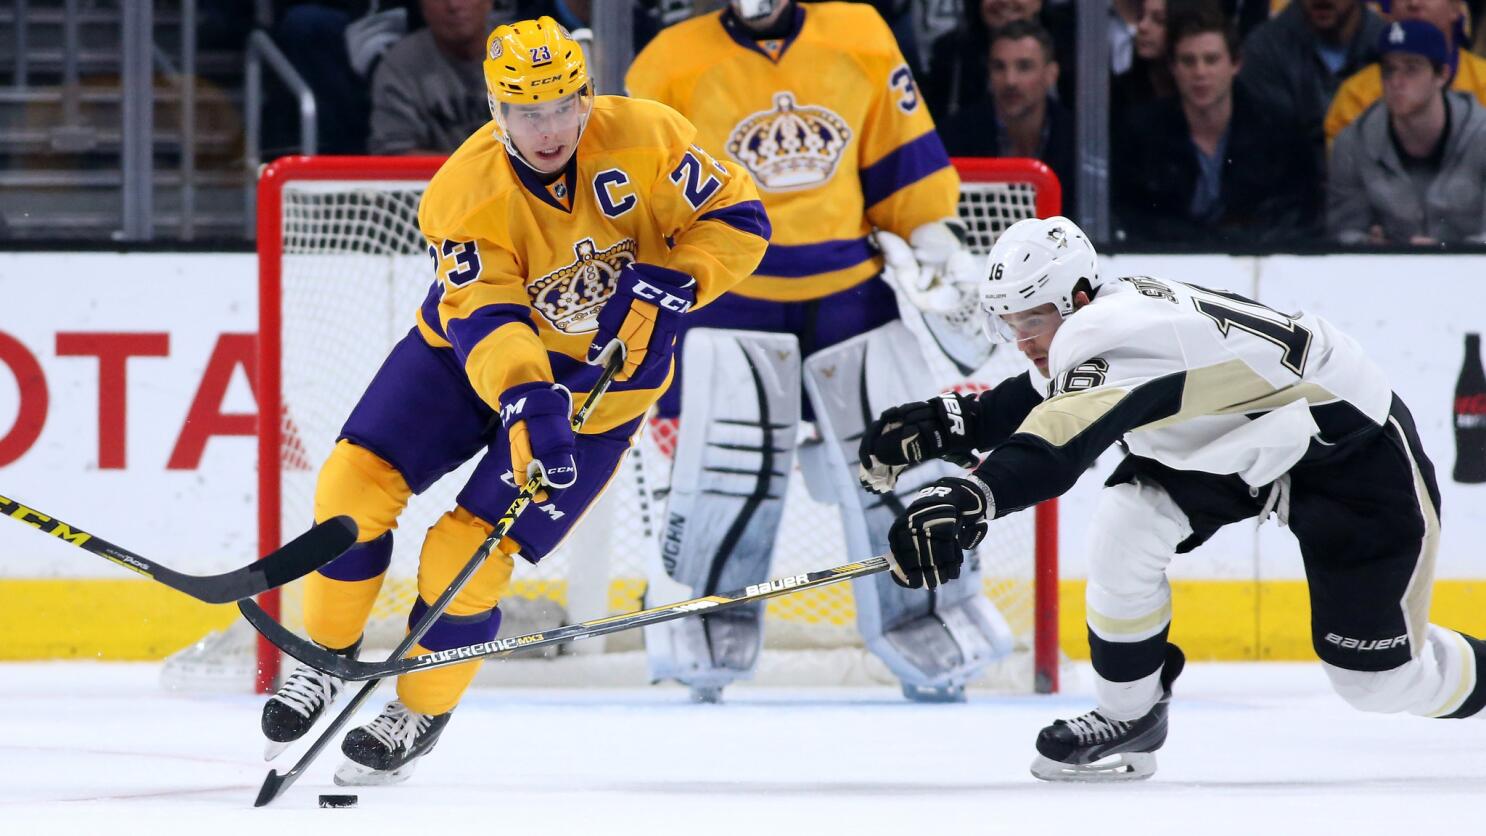 Hockey Feed - The Kings will unveil a statue of Dustin Brown next